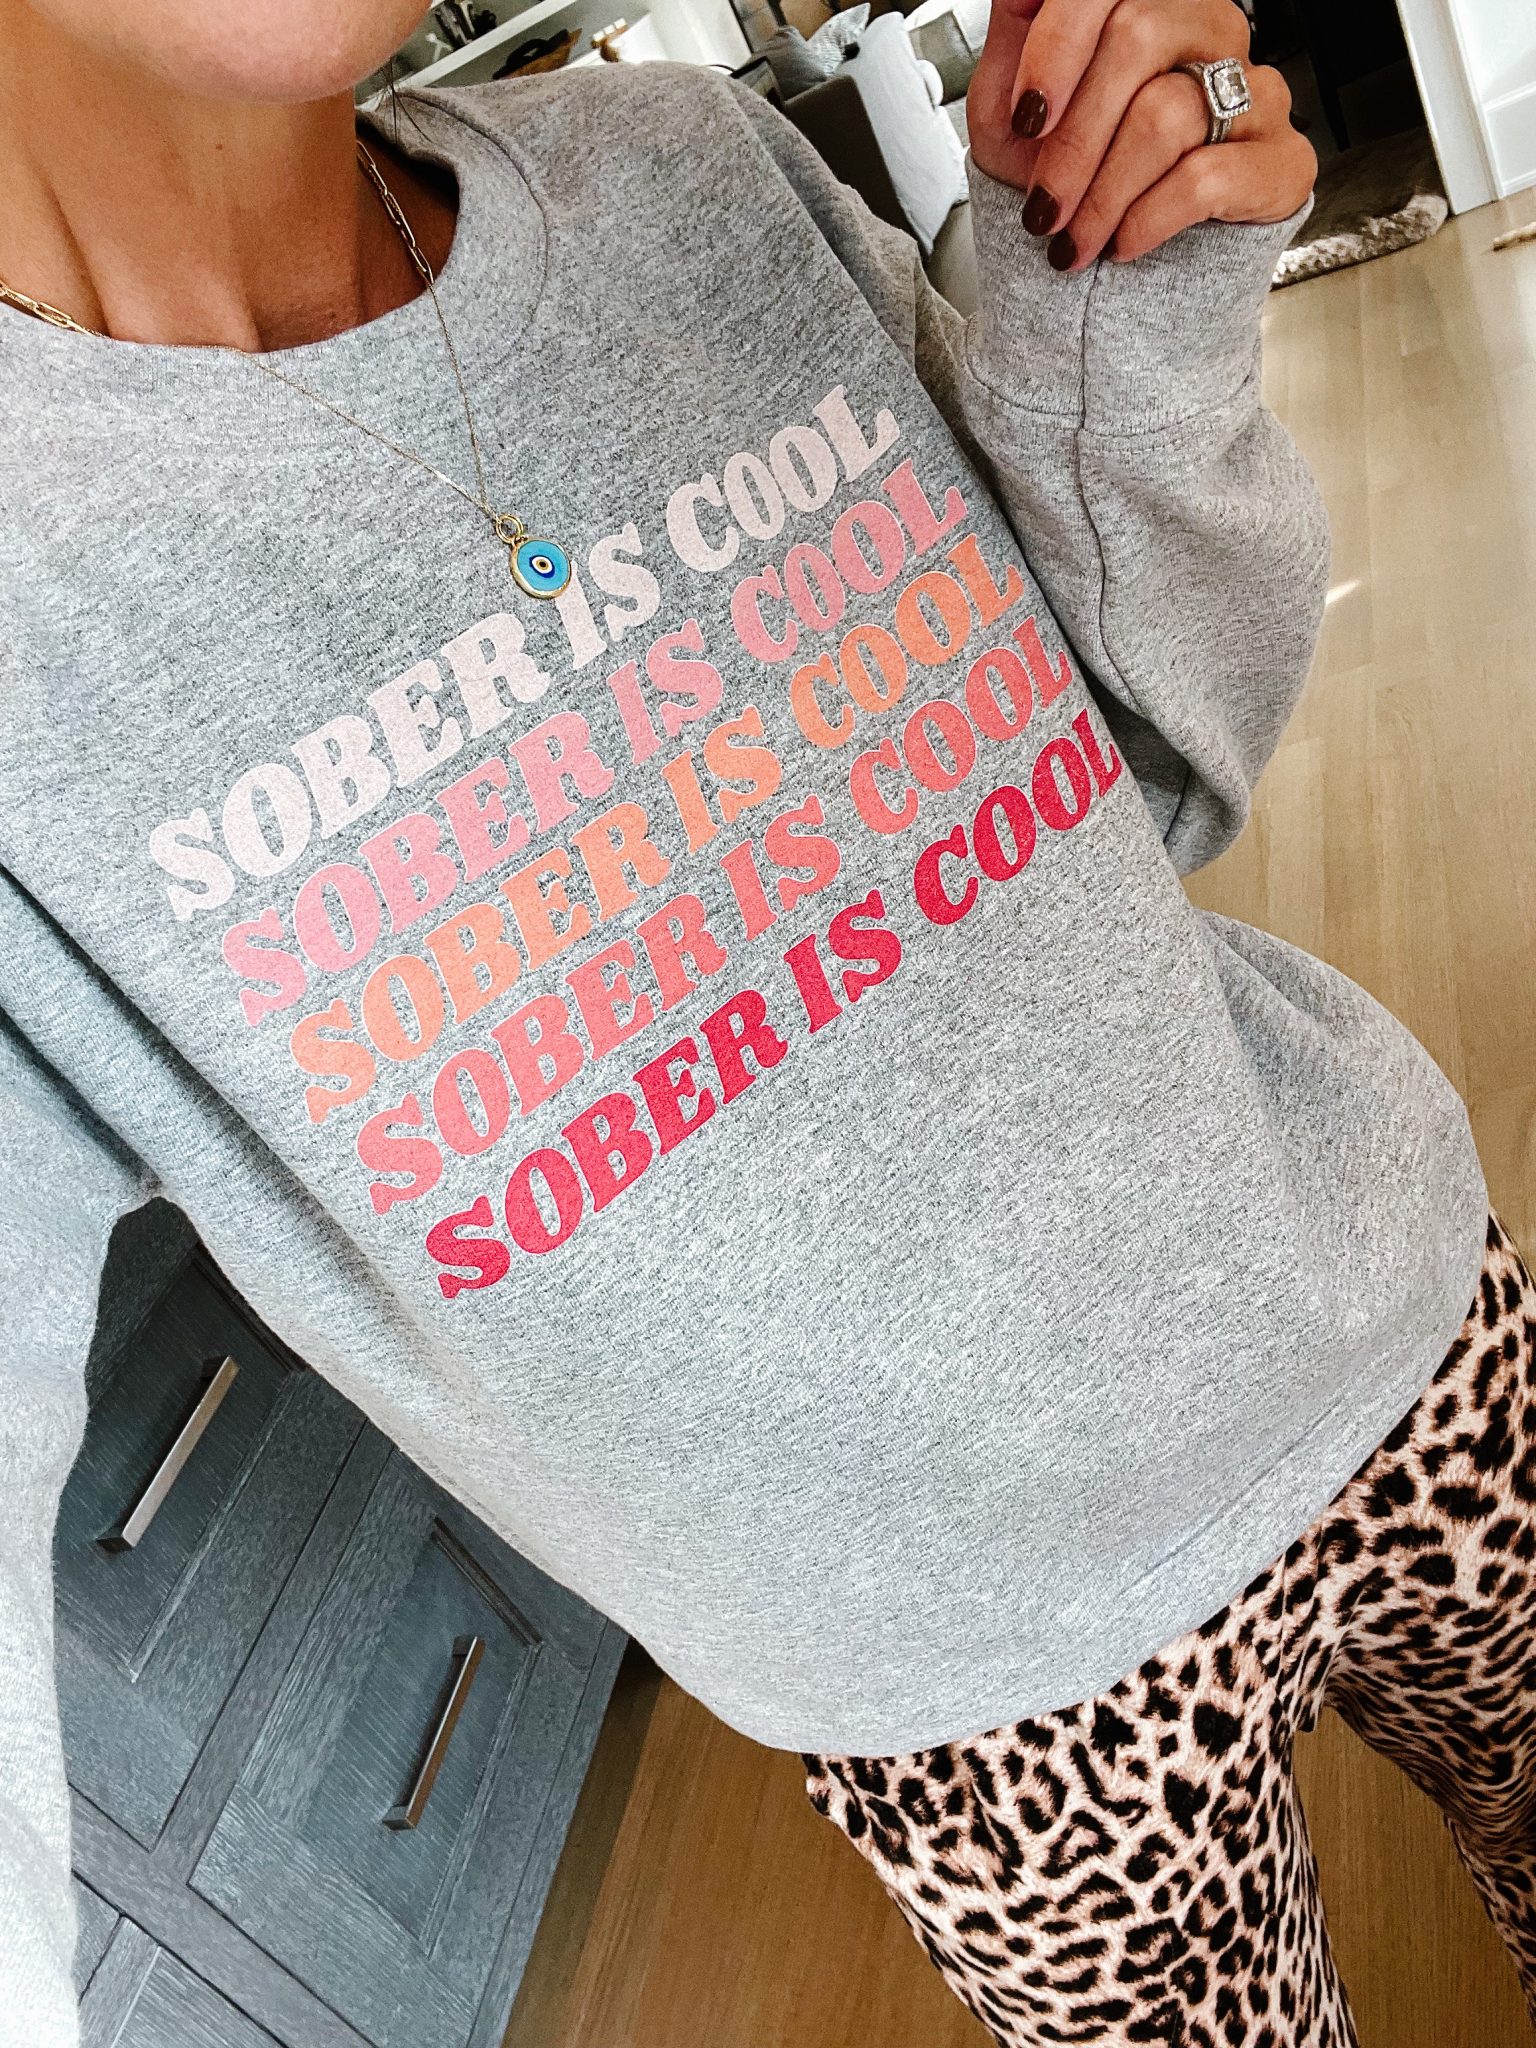 Suzanne wearing a graphic pullover that says "Sobriety is cool"